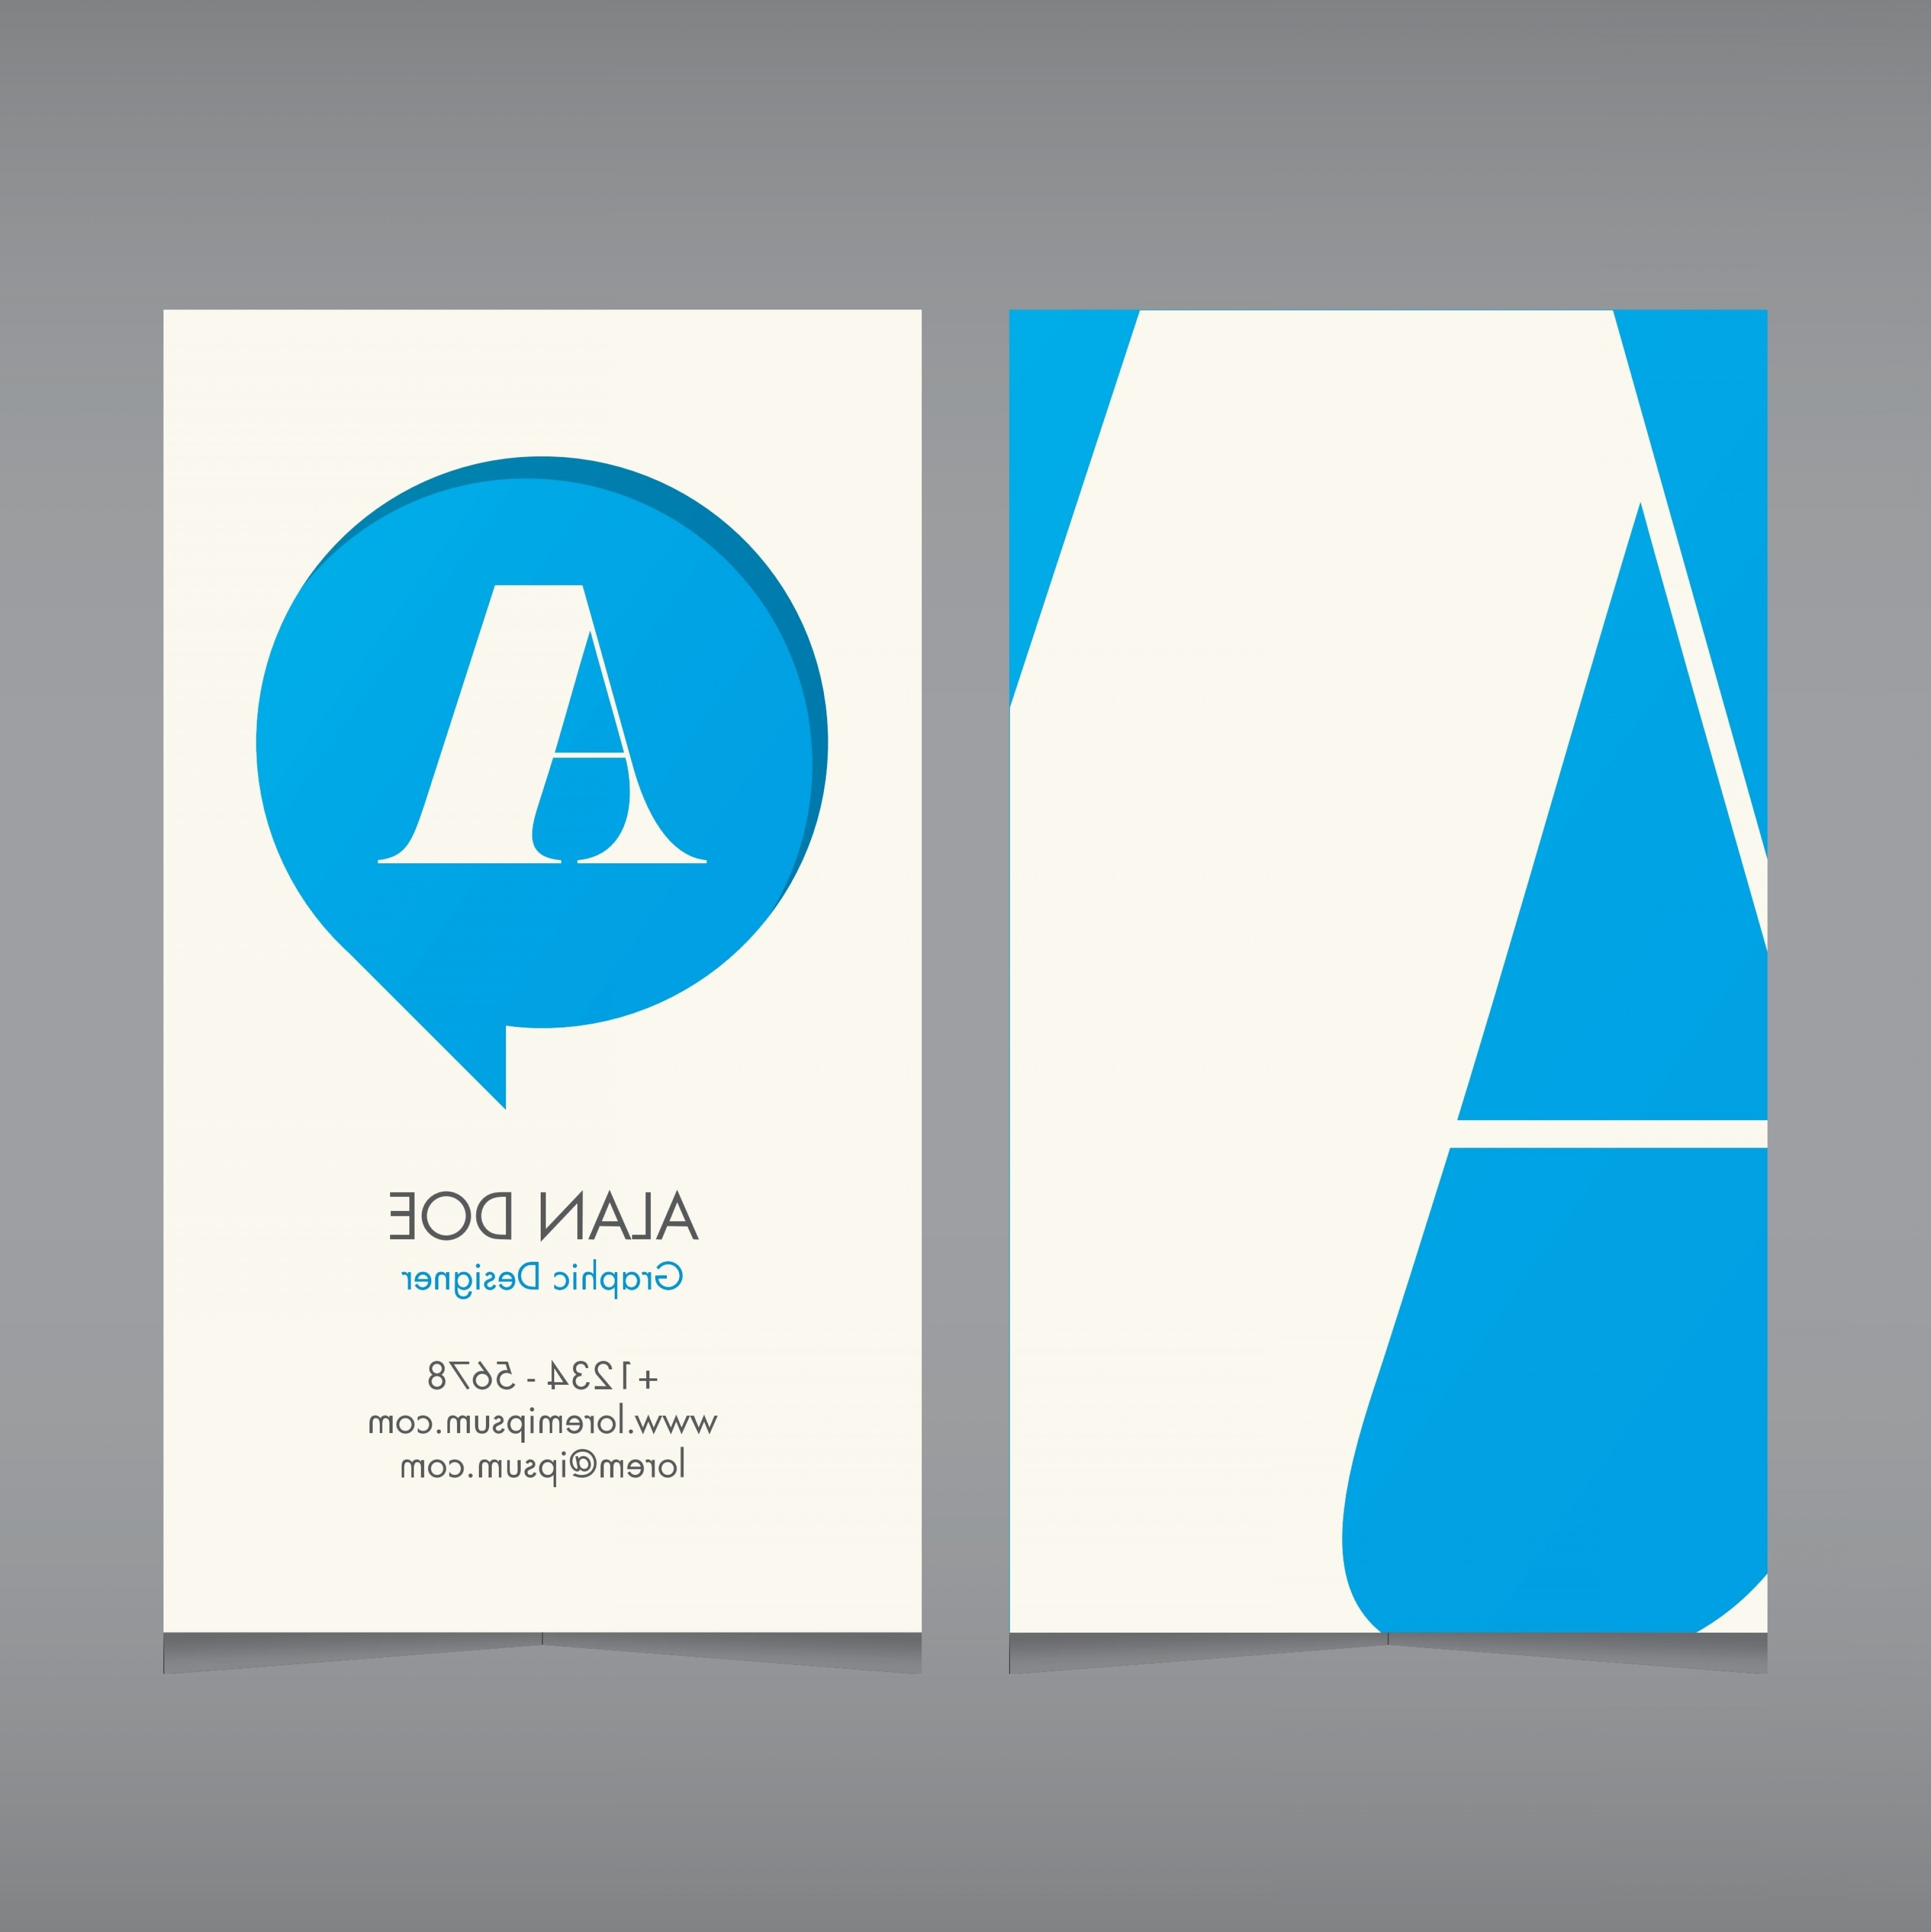 Free Vector Files for Illustrator at Getdrawings Of Illustrator Business Card Template Free